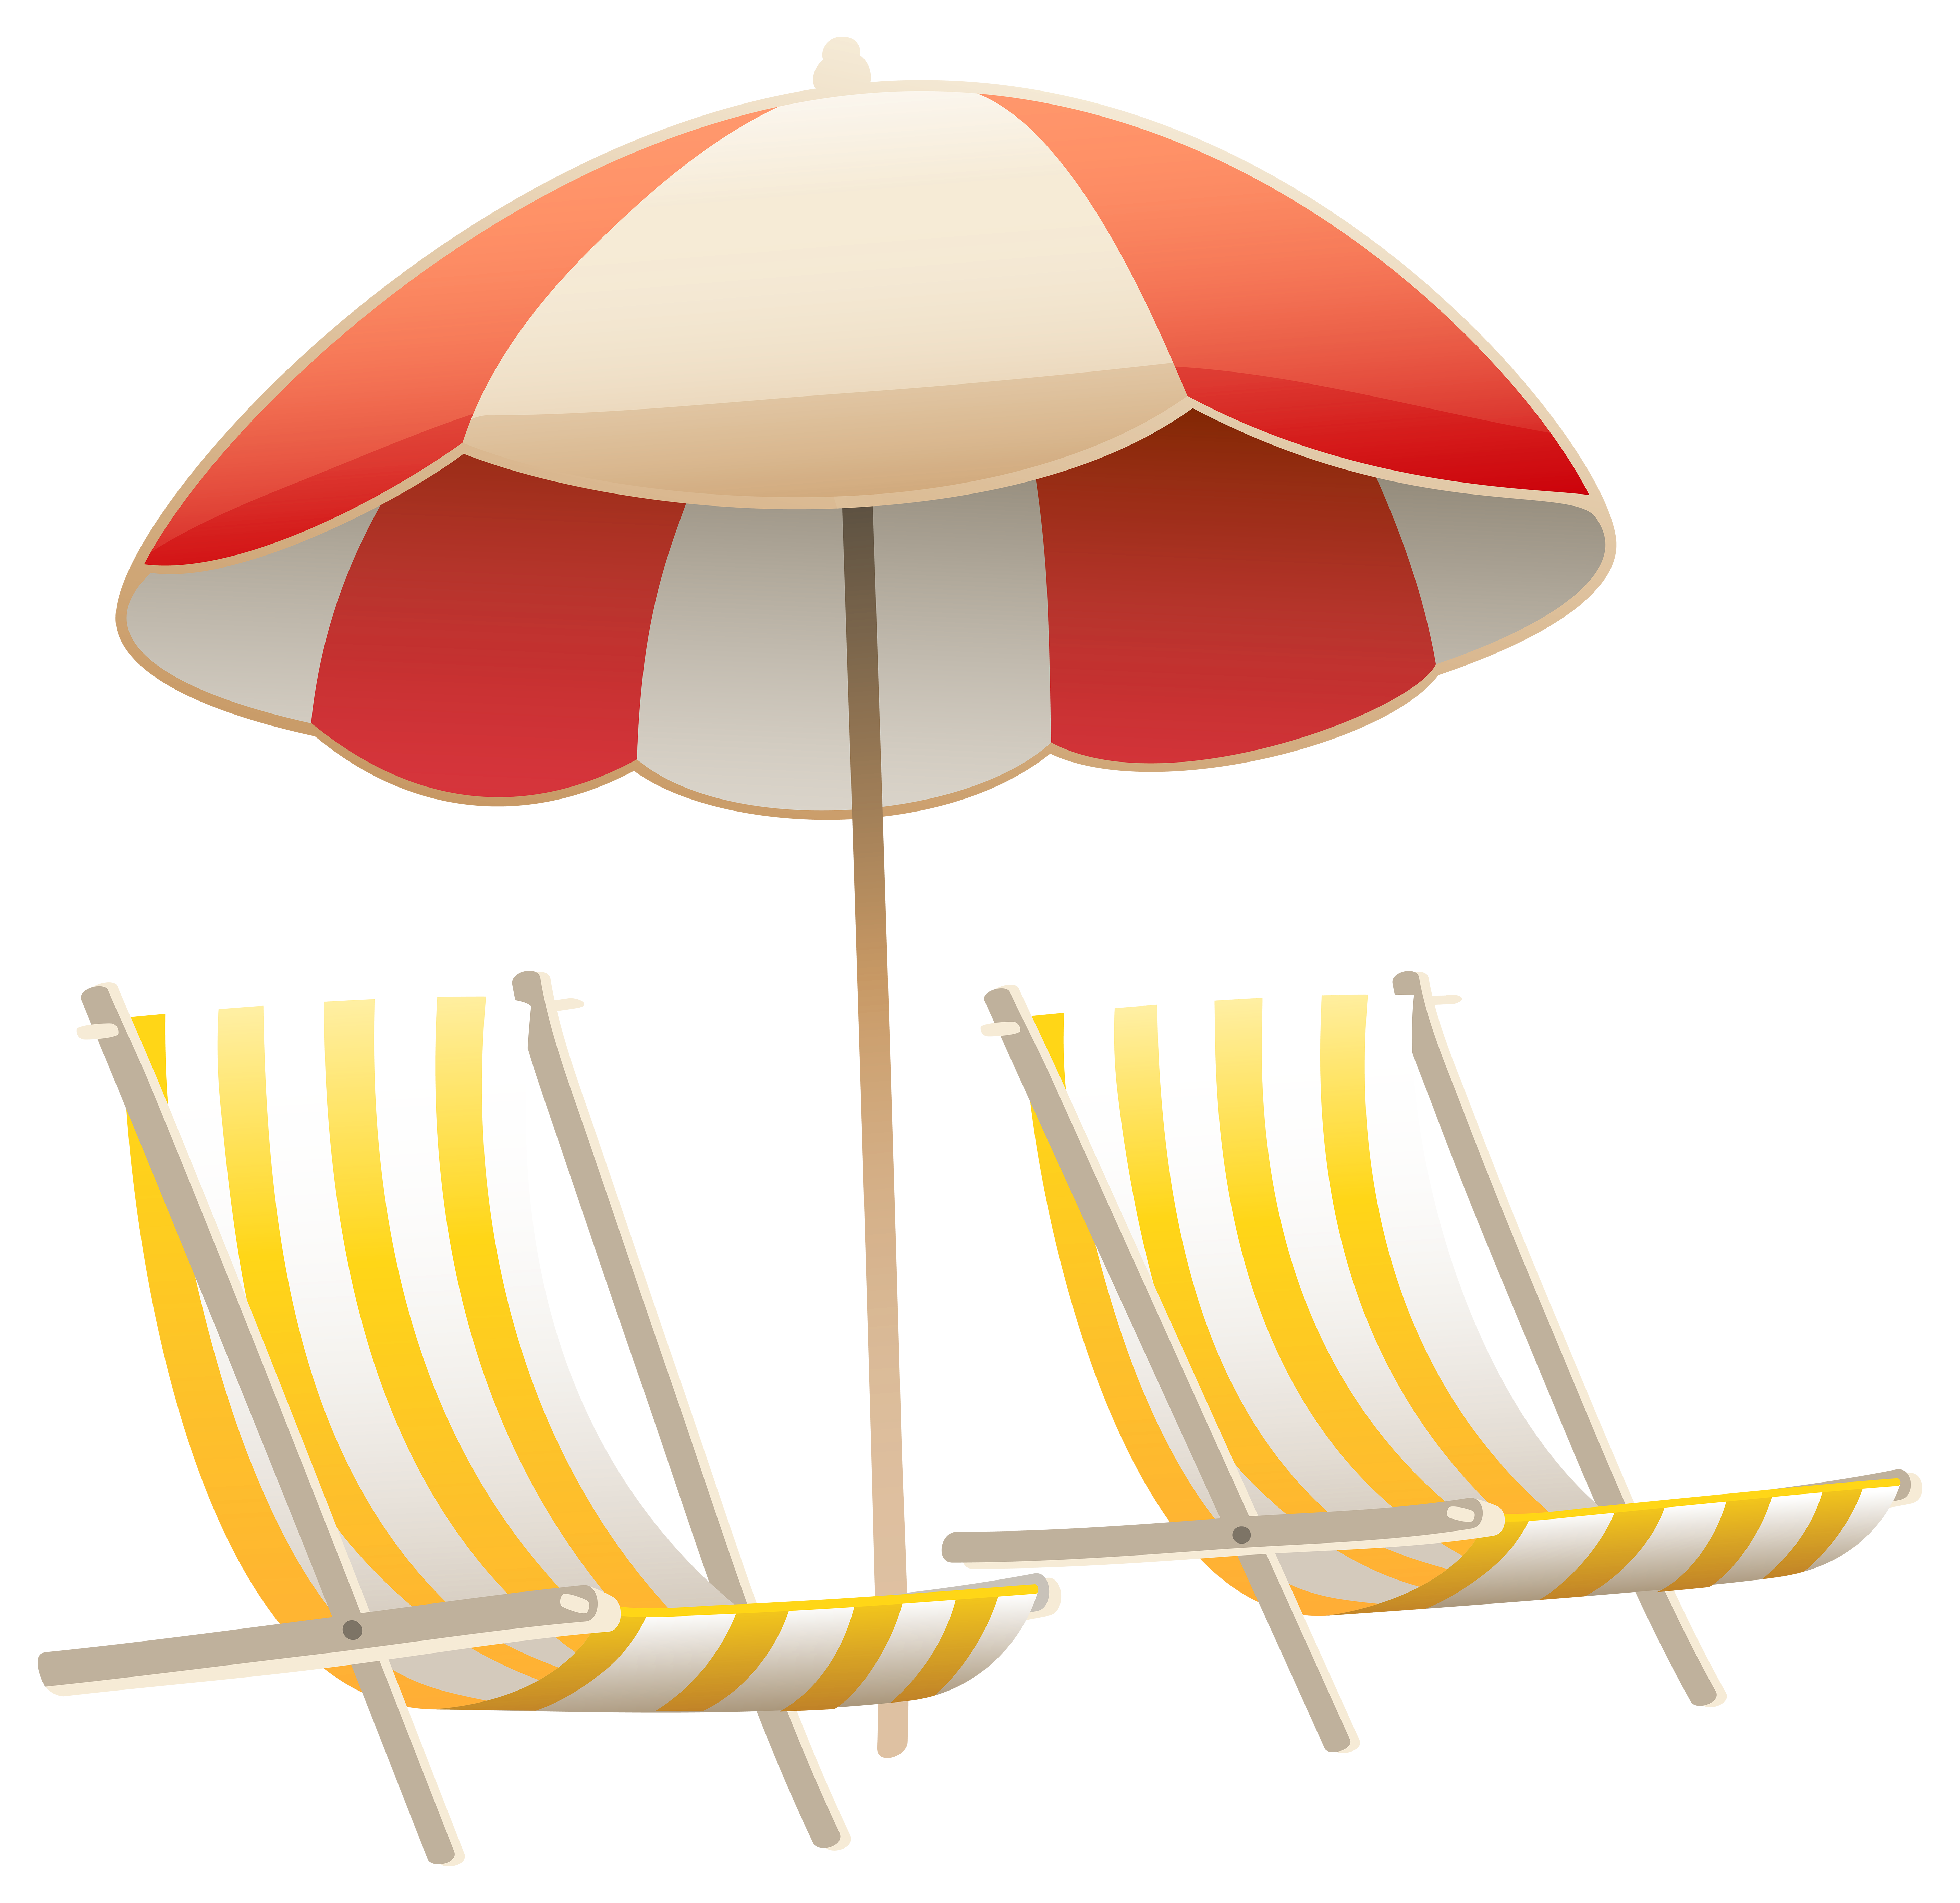 Clipart books beach. Umbrella and chairs png